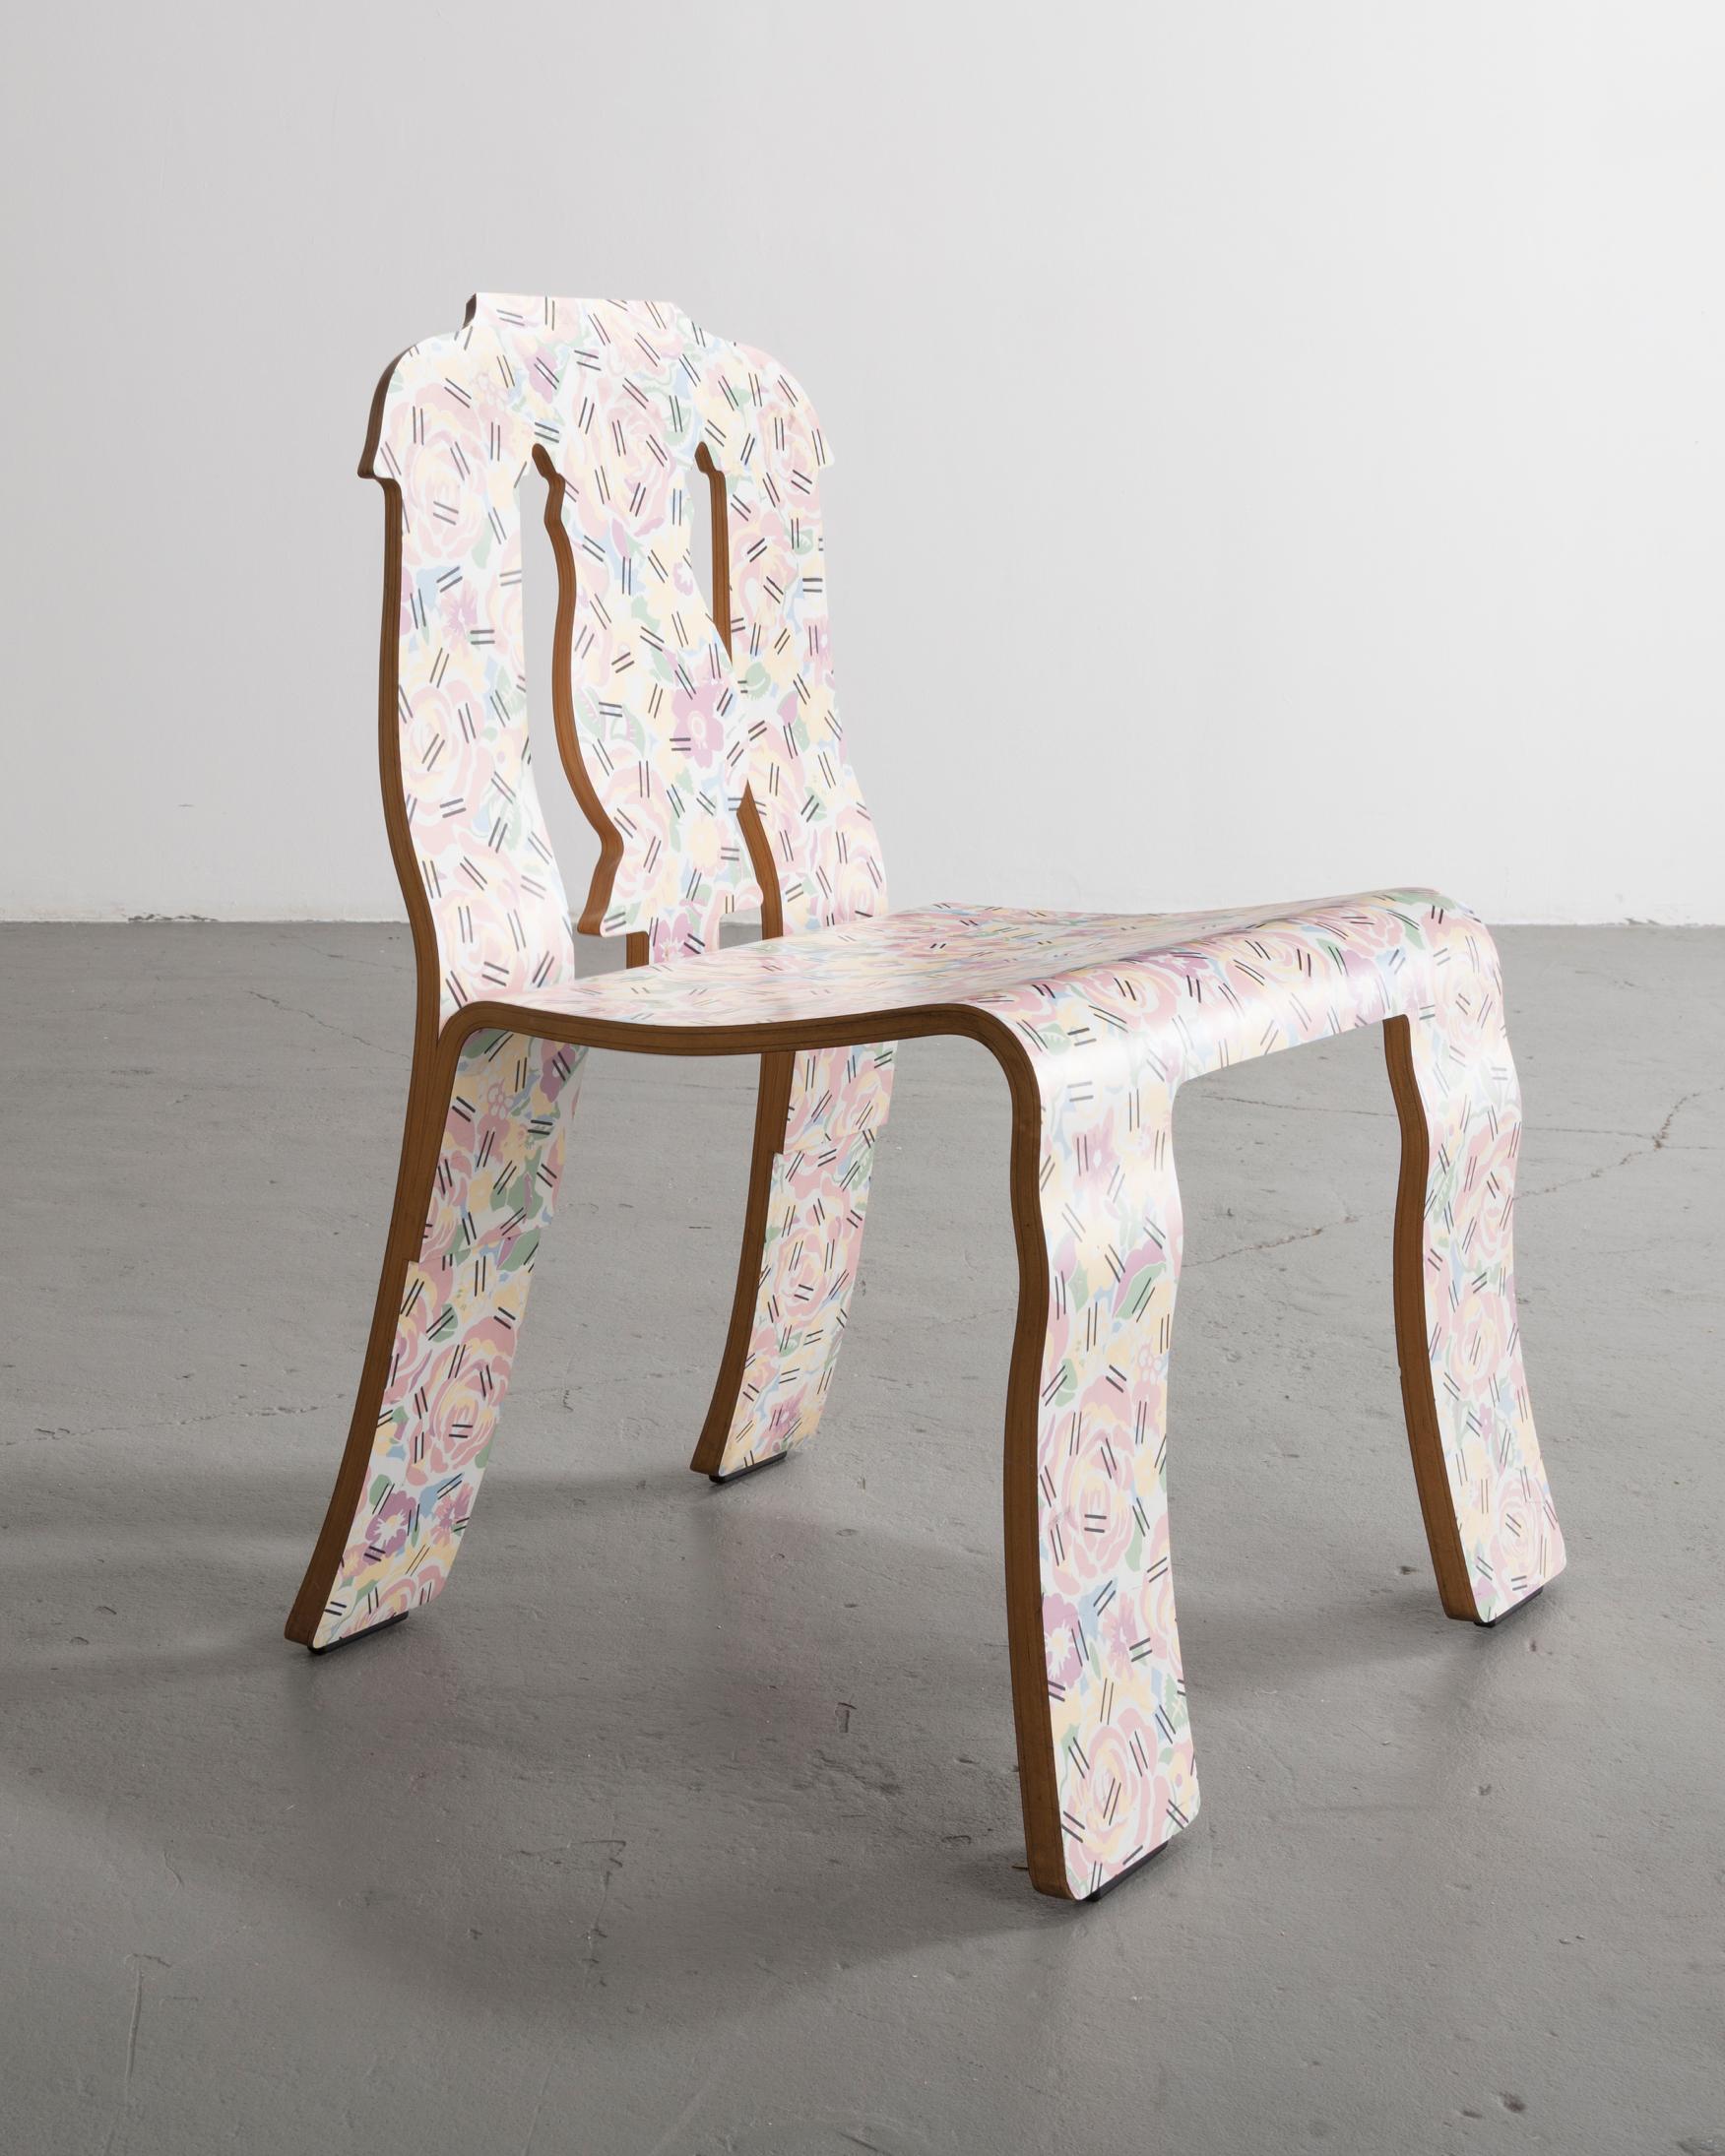 Empire chair in molded plywood with laminated finish in the 